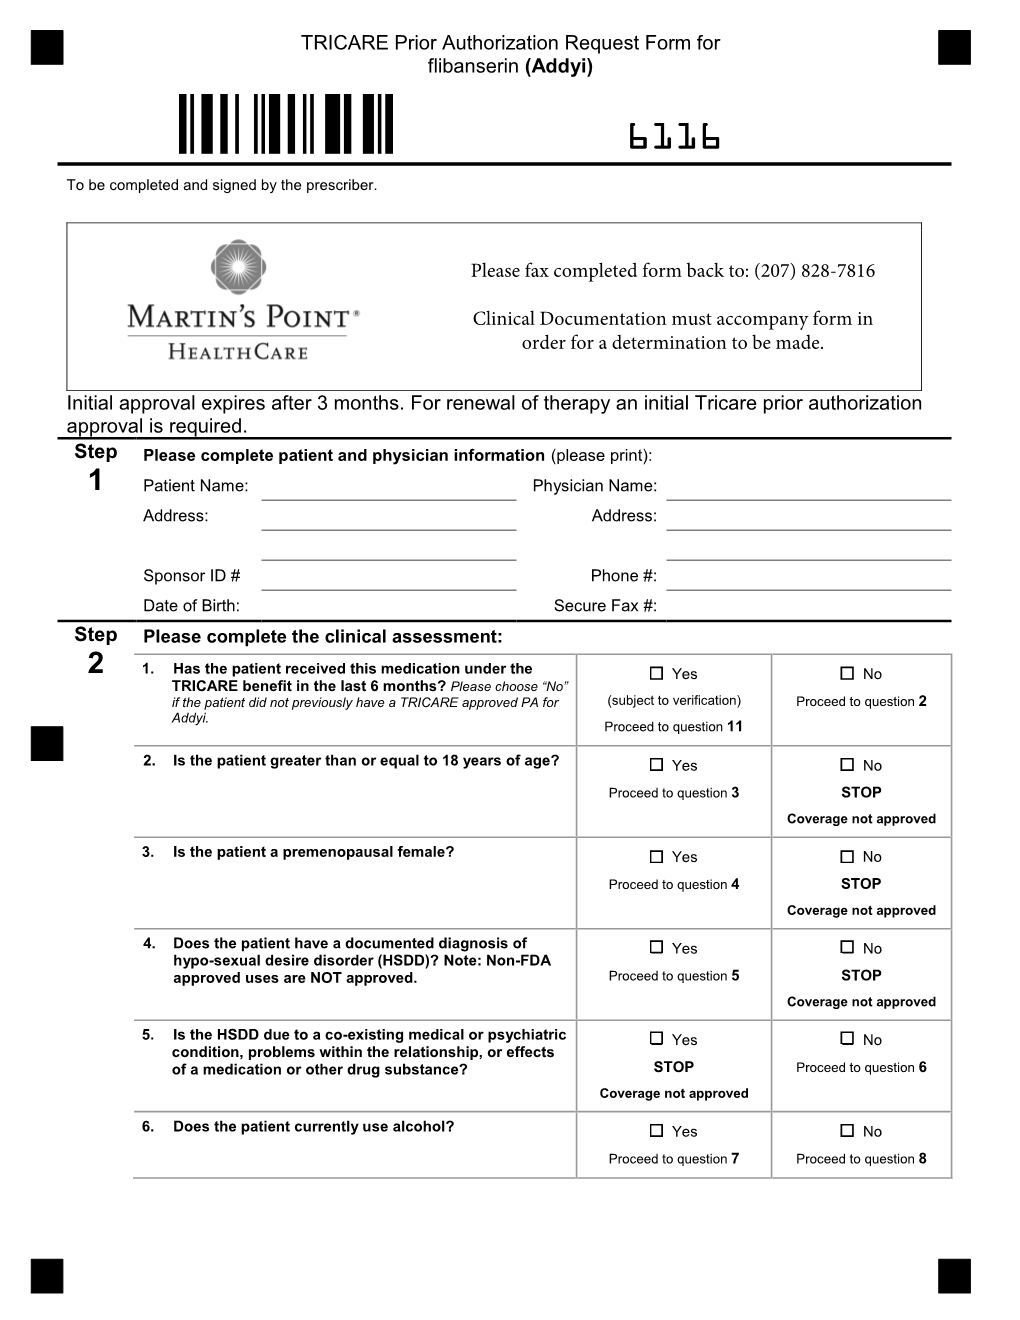 TRICARE Prior Authorization Request Form for Flibanserin (Addyi)